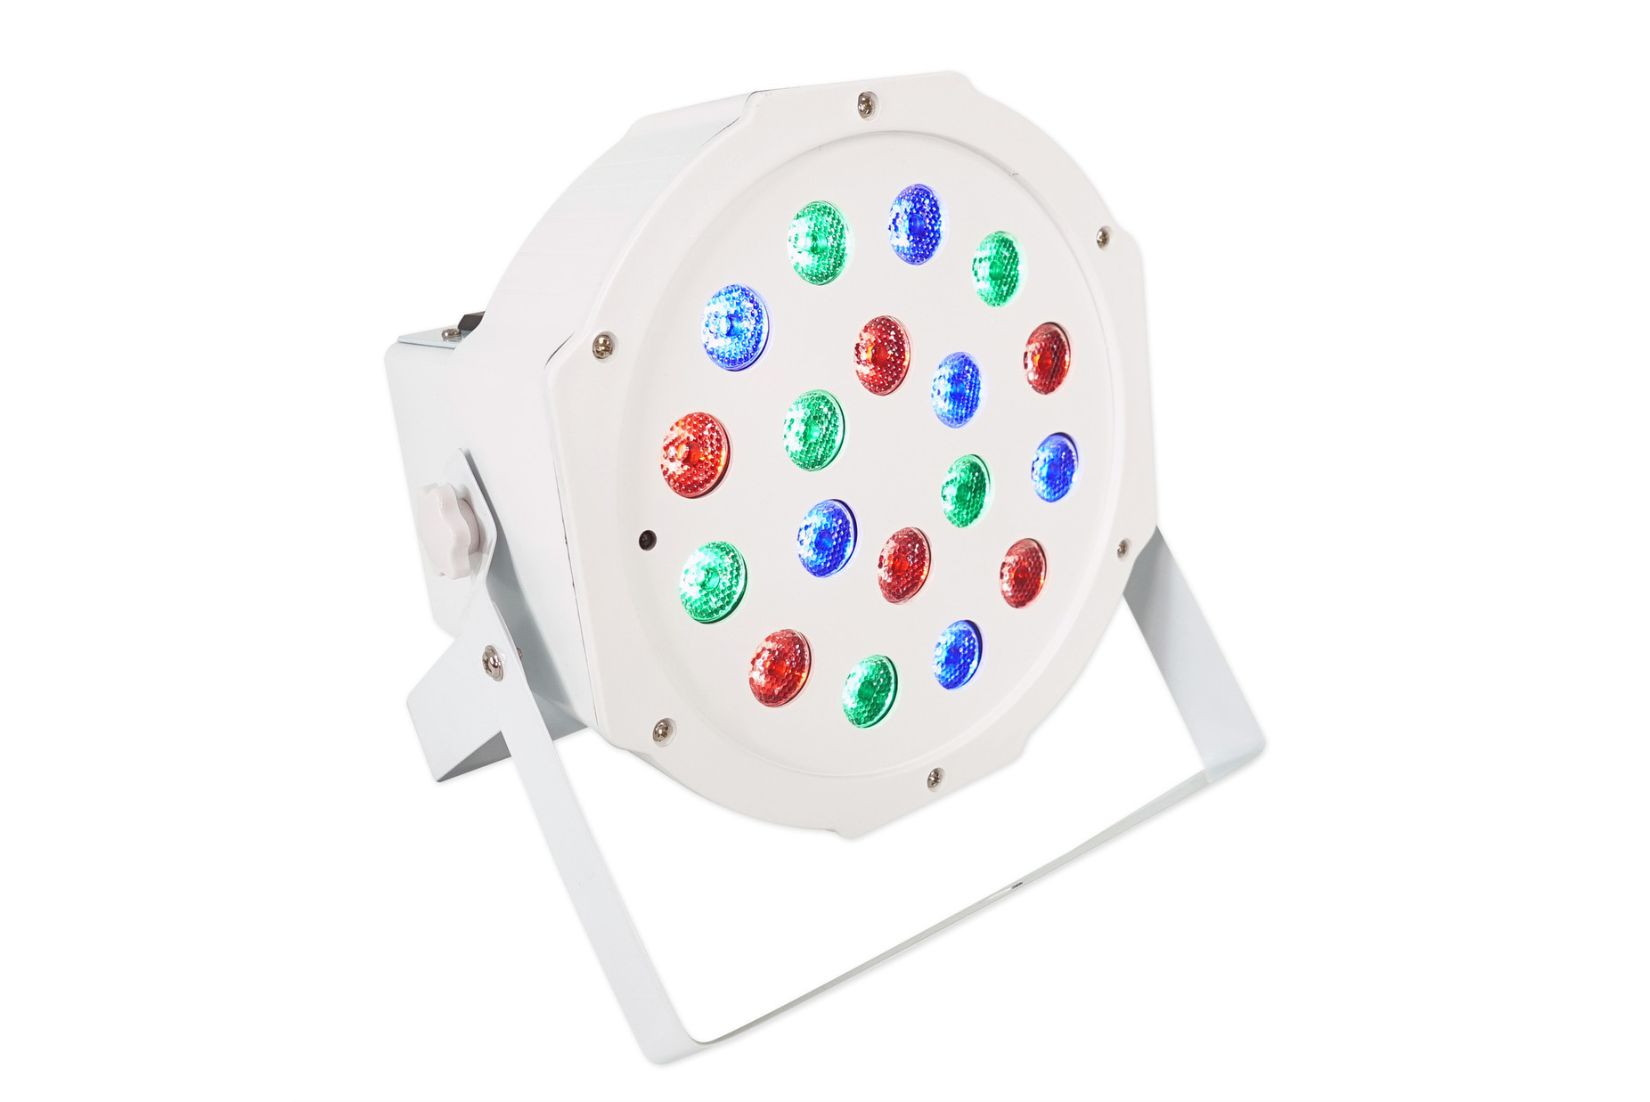 White uplighting fixture for rent. Lights can be programmed to match your room decor.